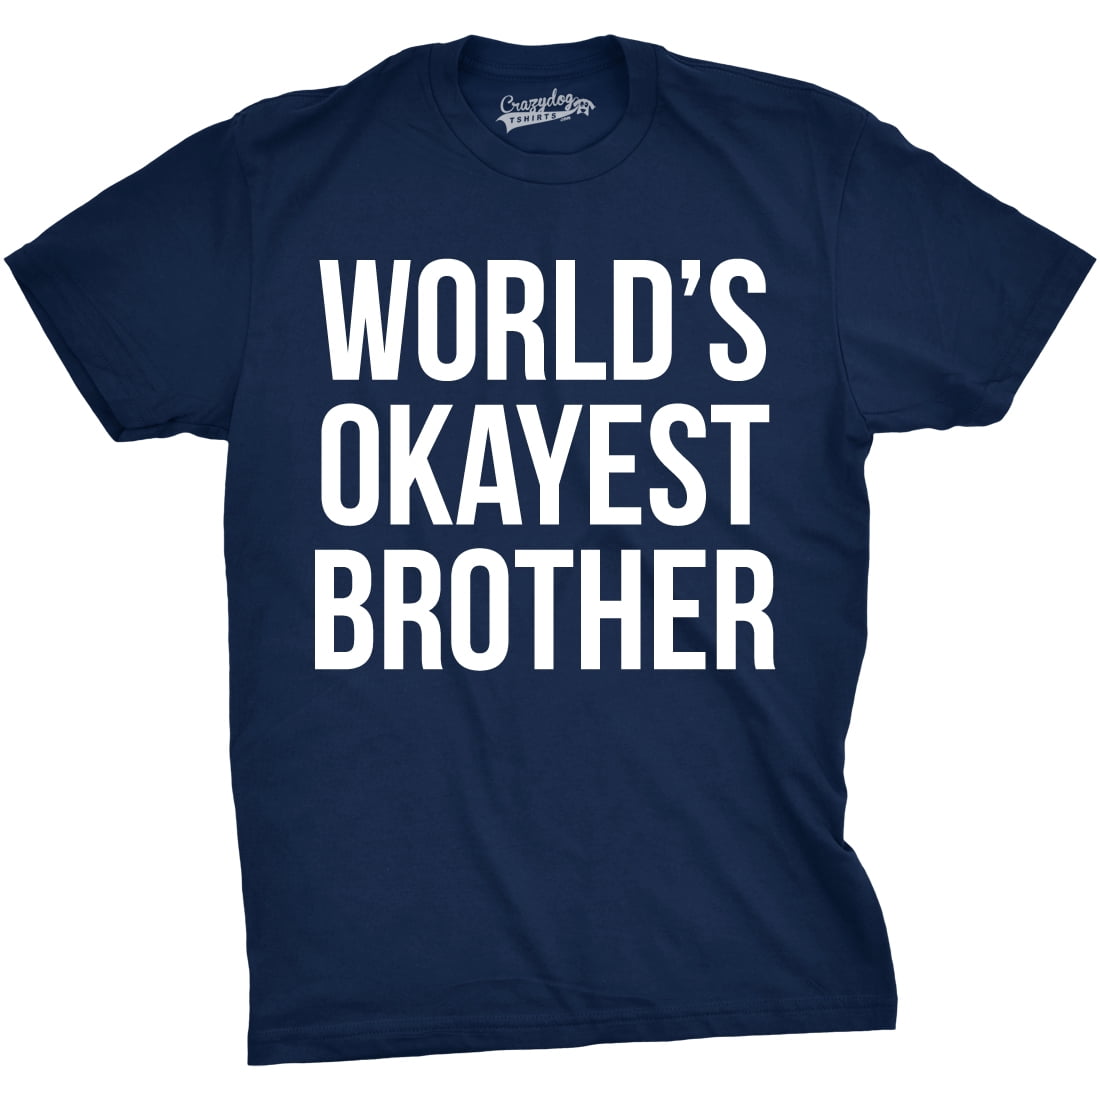 Worlds Okayest Brother Socks Funny Cool Family Bro Graphic Novelty Footwear